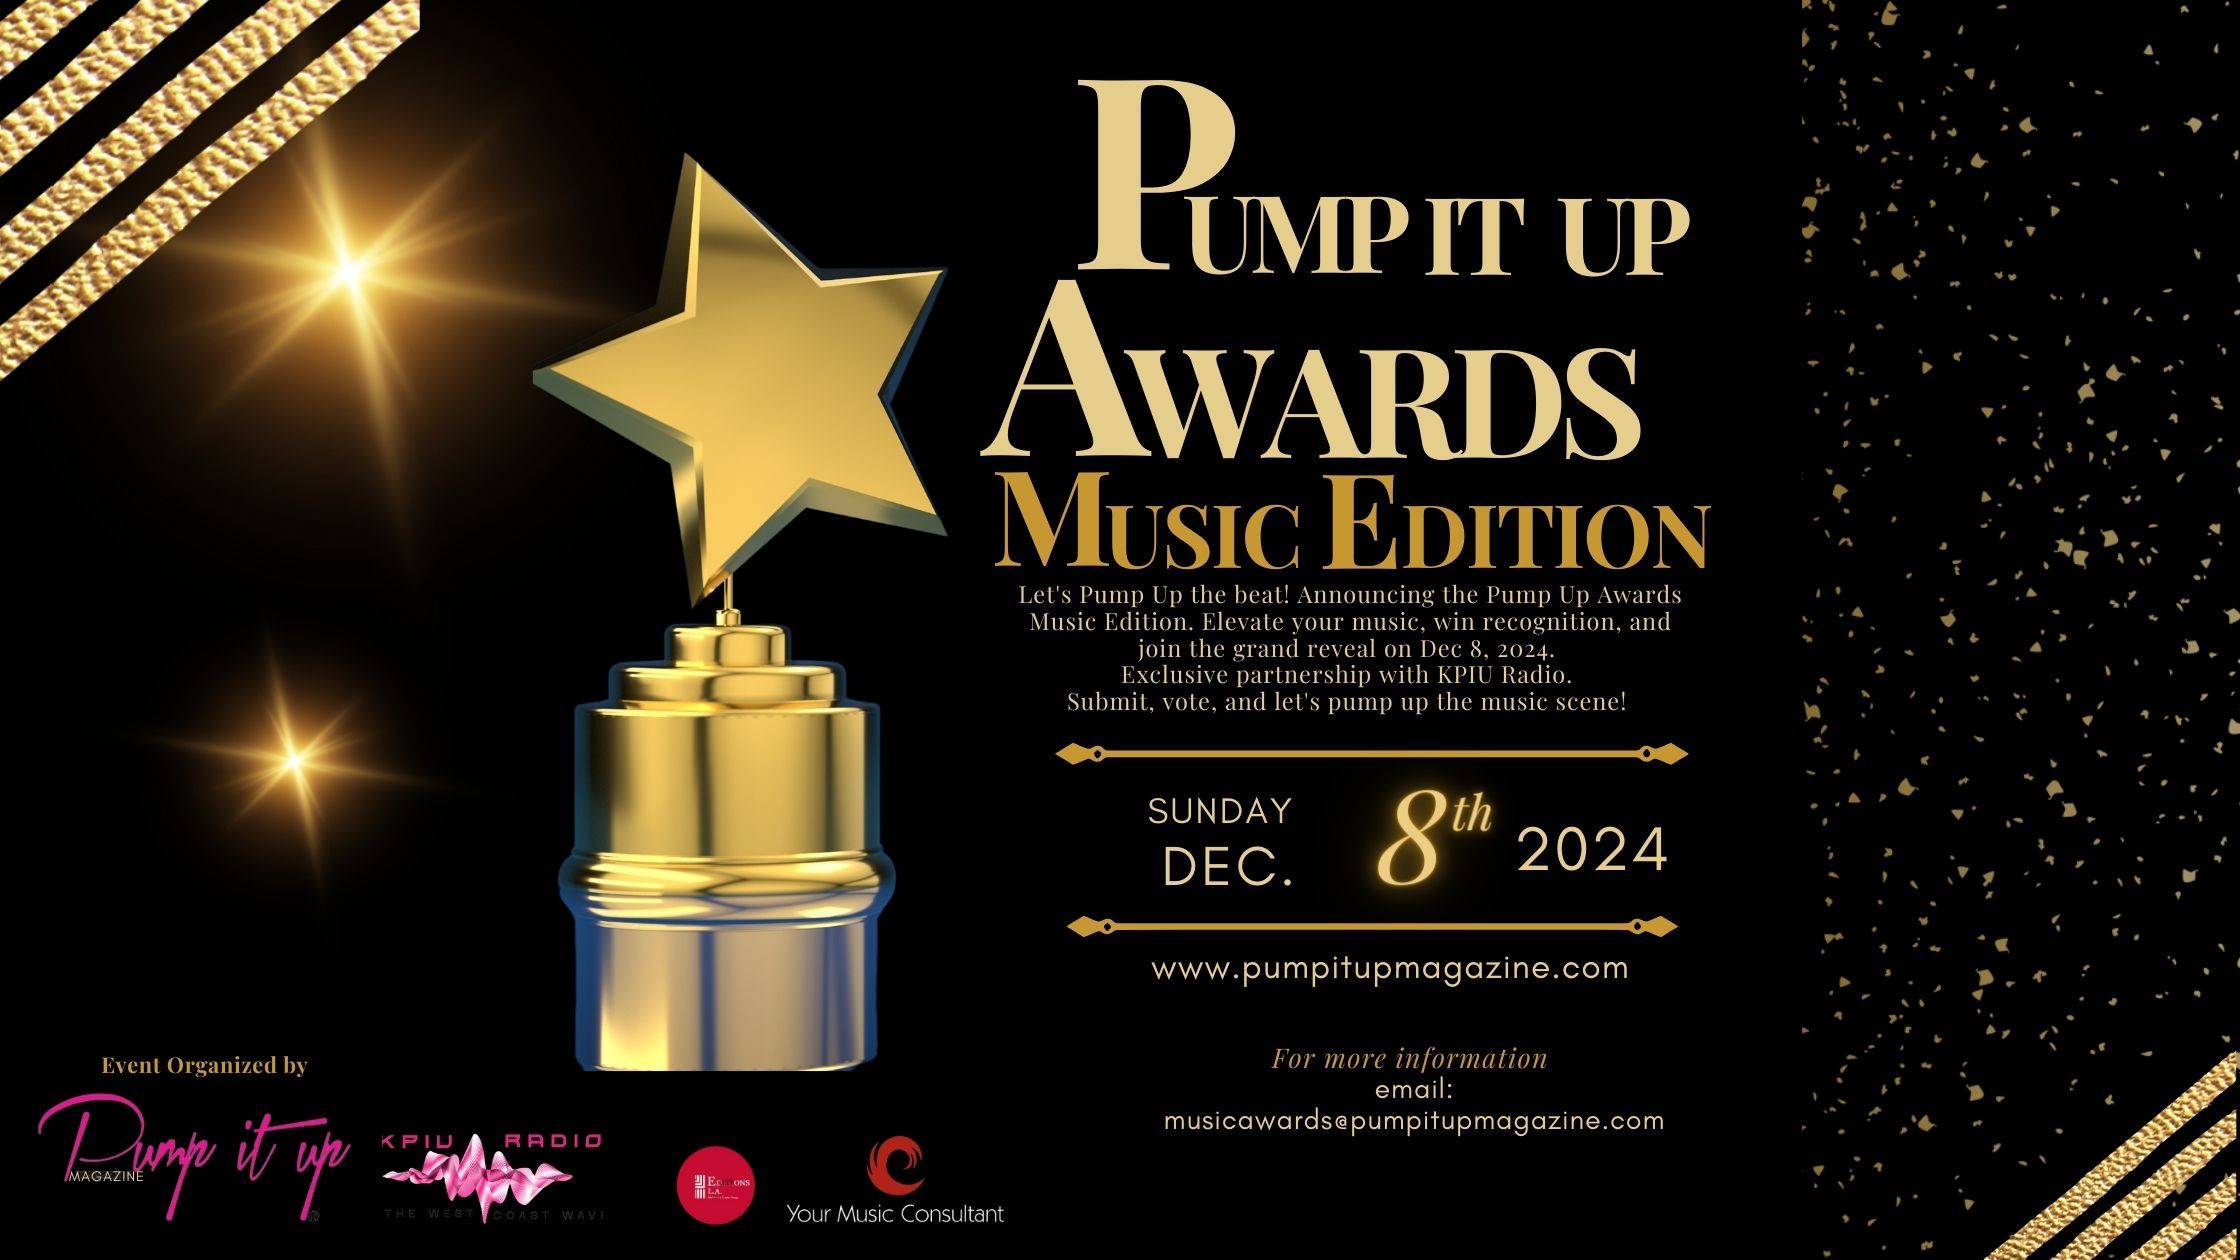 sunday 8 usic A wards ump Let’s Pump Up the beat! Announcing the Pump Up Awards Music Edition. Elevate your music, win recognition, and join the grand reveal on Dec 8, 2024. Exclusive partnership